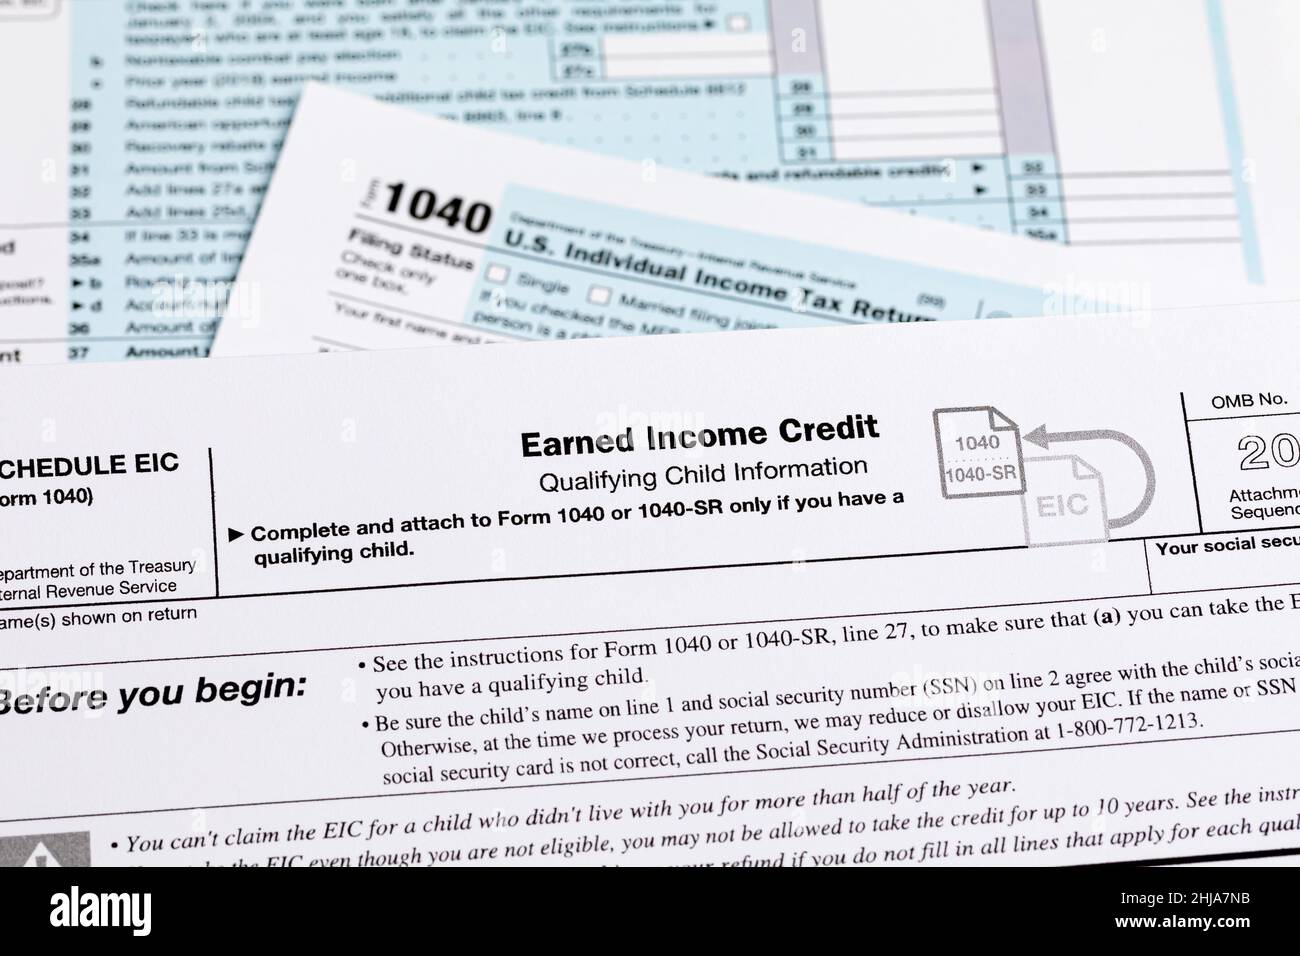 Earned income tax credit form. Tax credit, deduction and tax return concept. Stock Photo